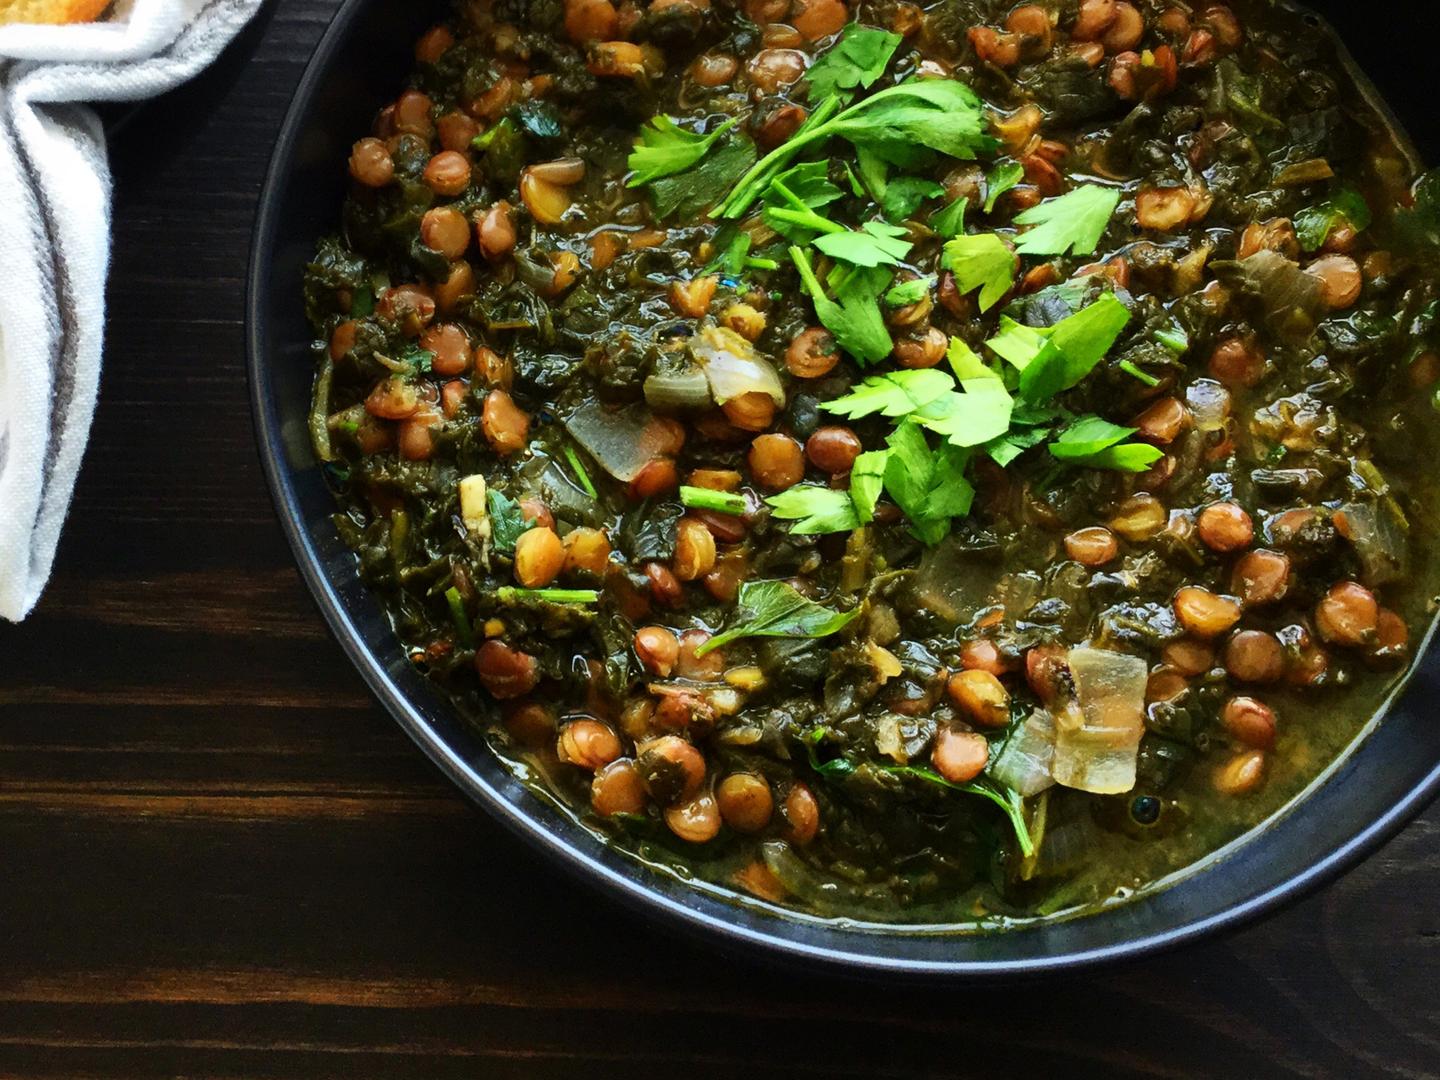 french green lentil stew with blanched greens | Functional Nutrition Alliance